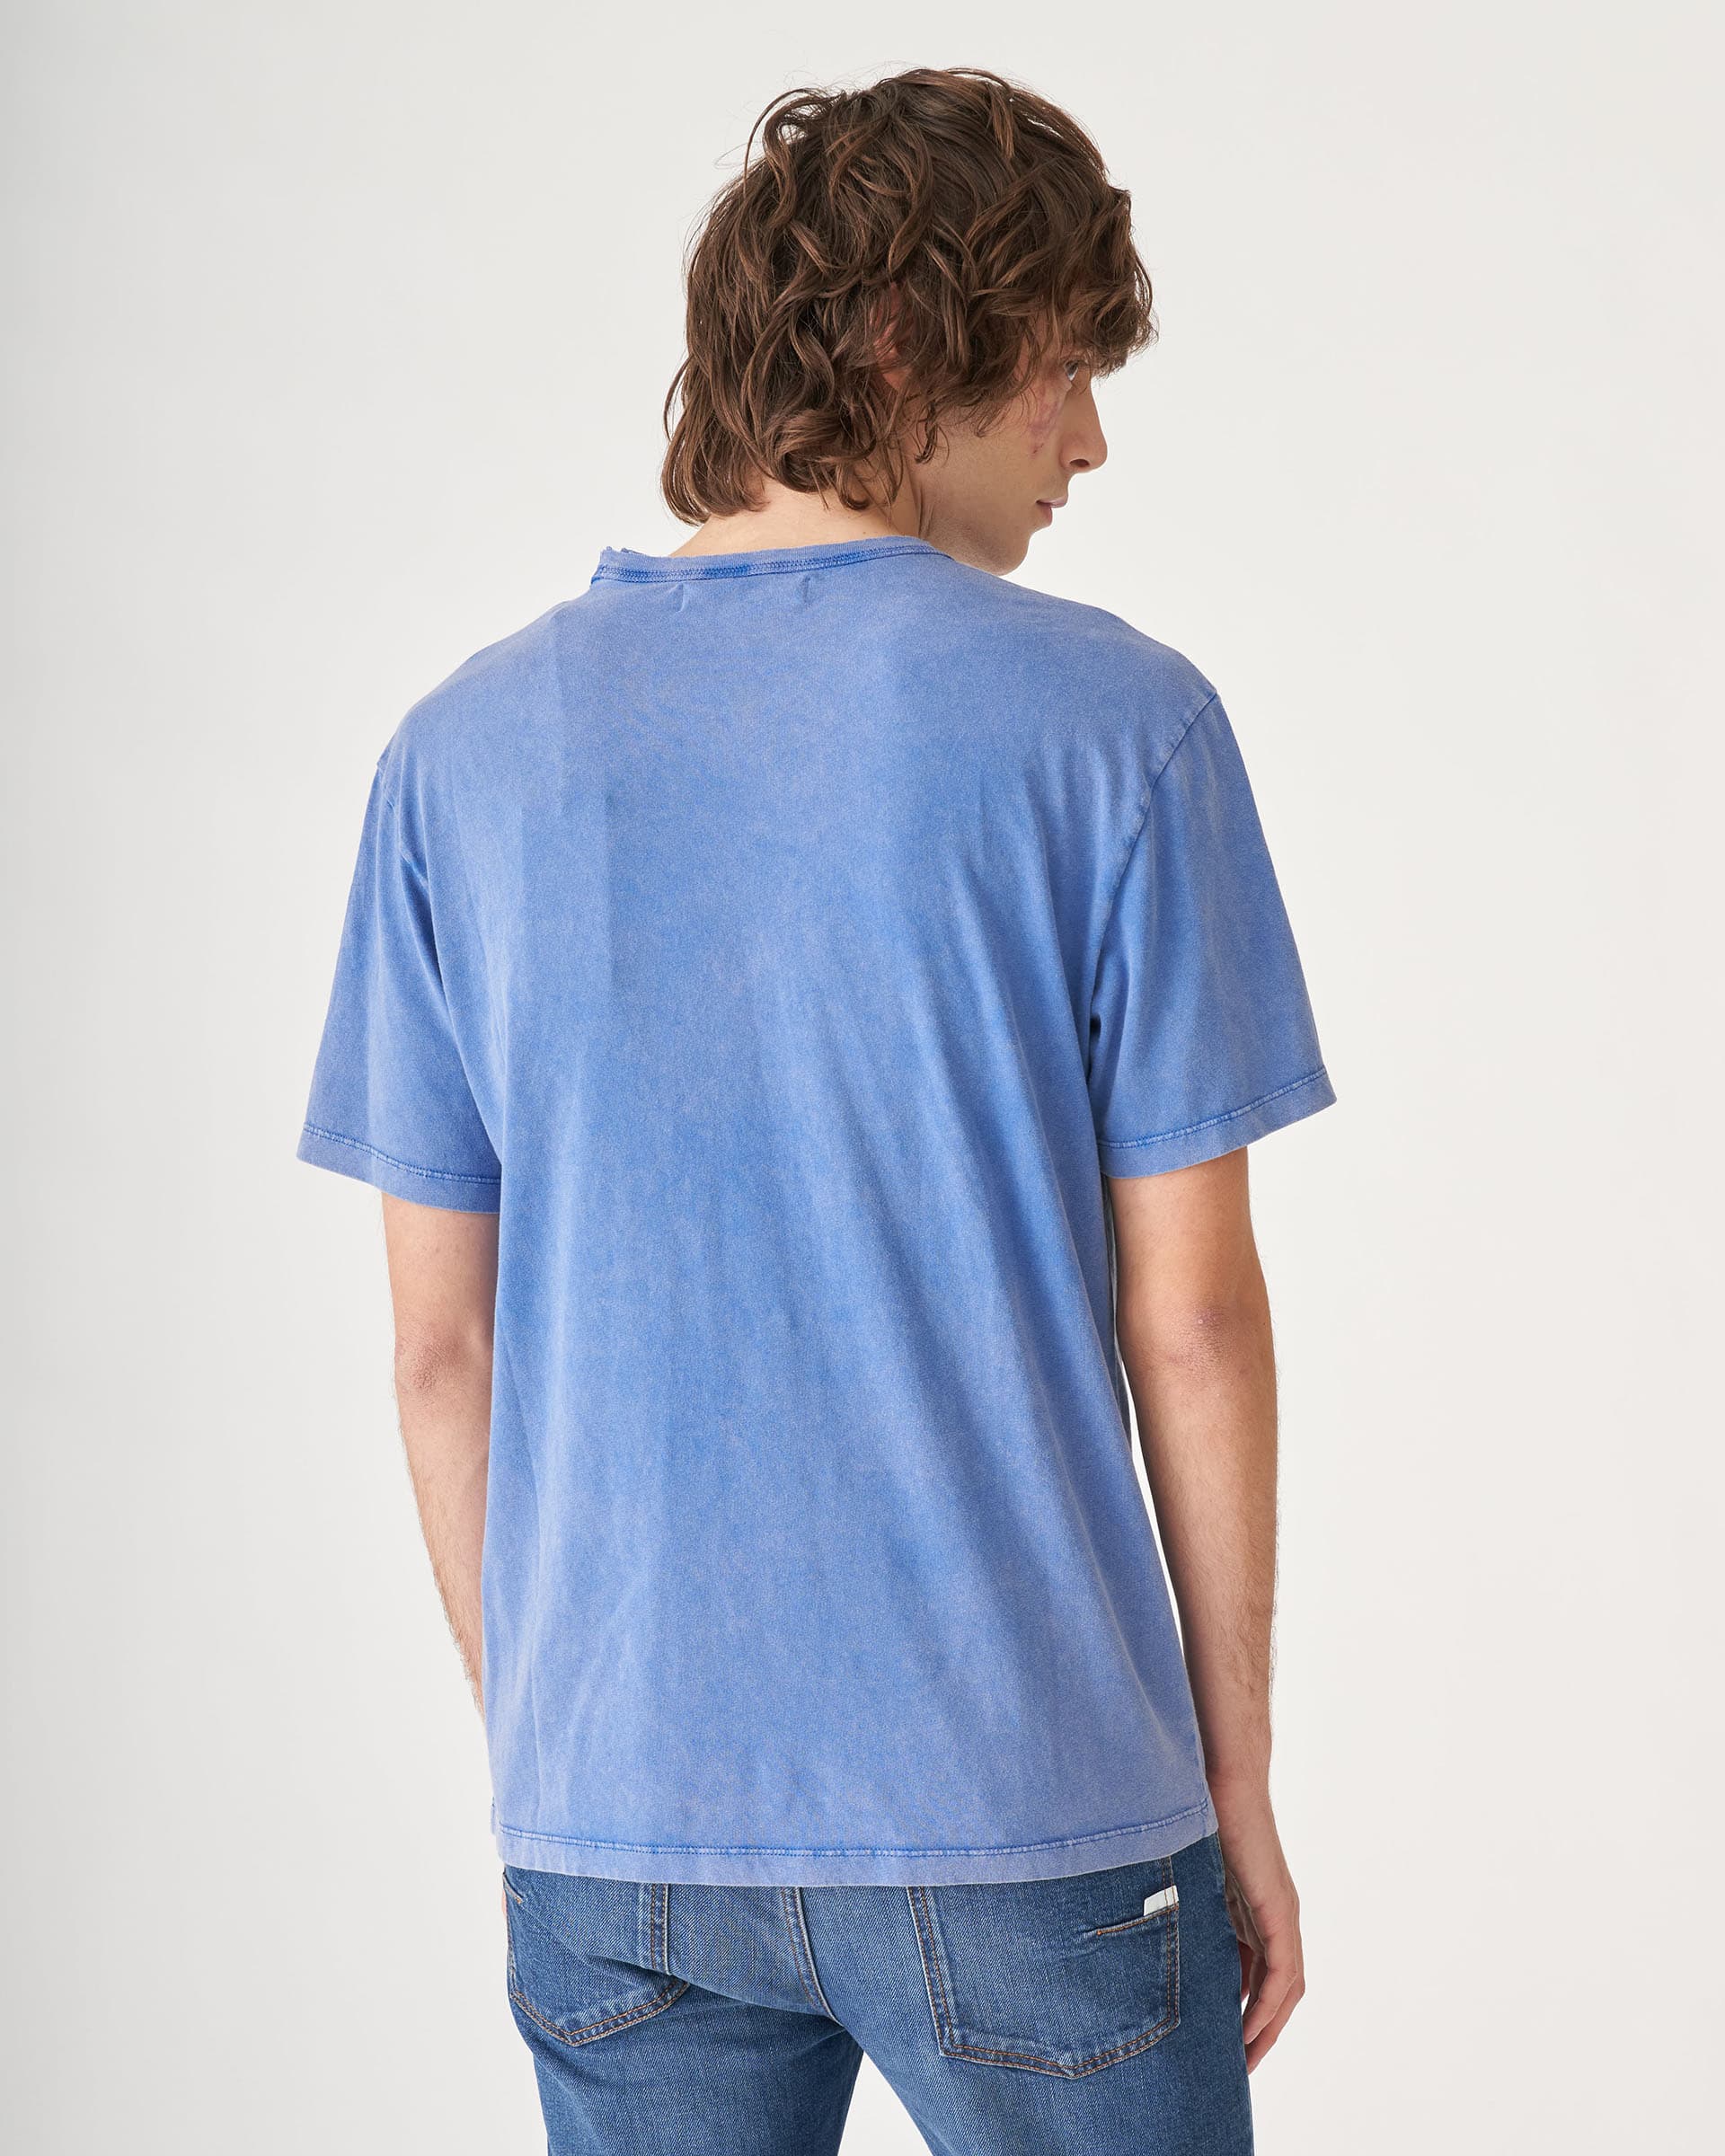 The Market Store | Treated 3-neck T-shirt